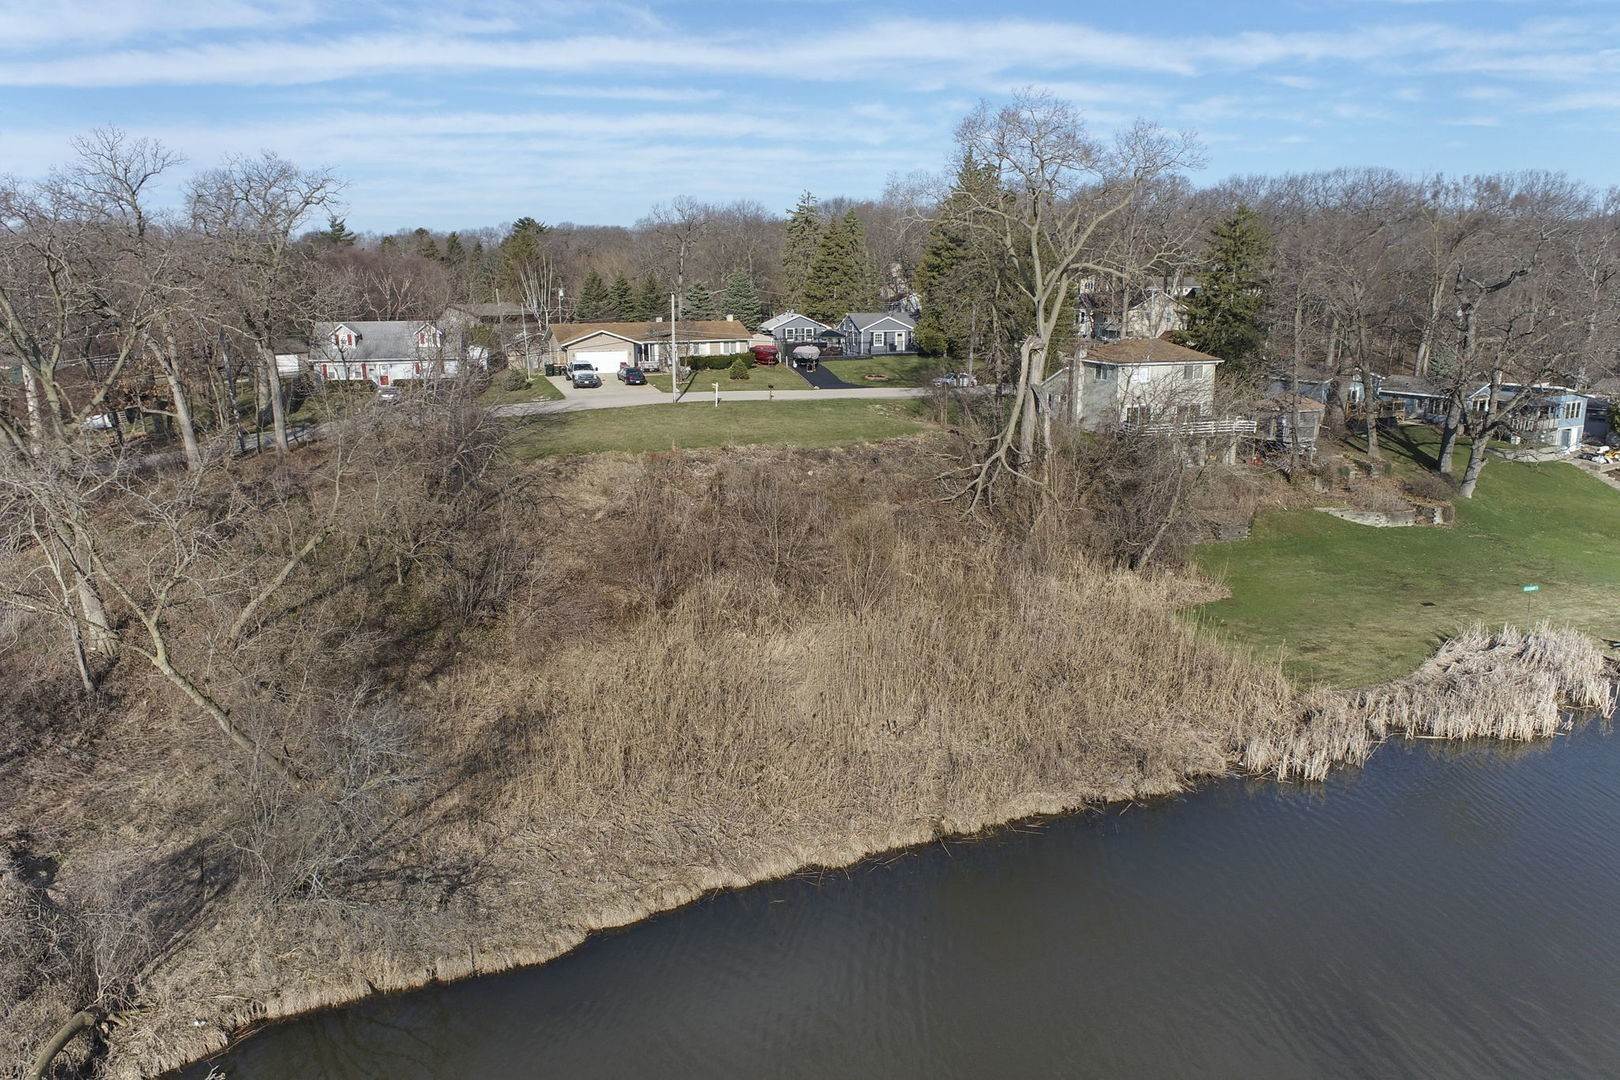 Land for Sale at Spring Grove, IL 60081